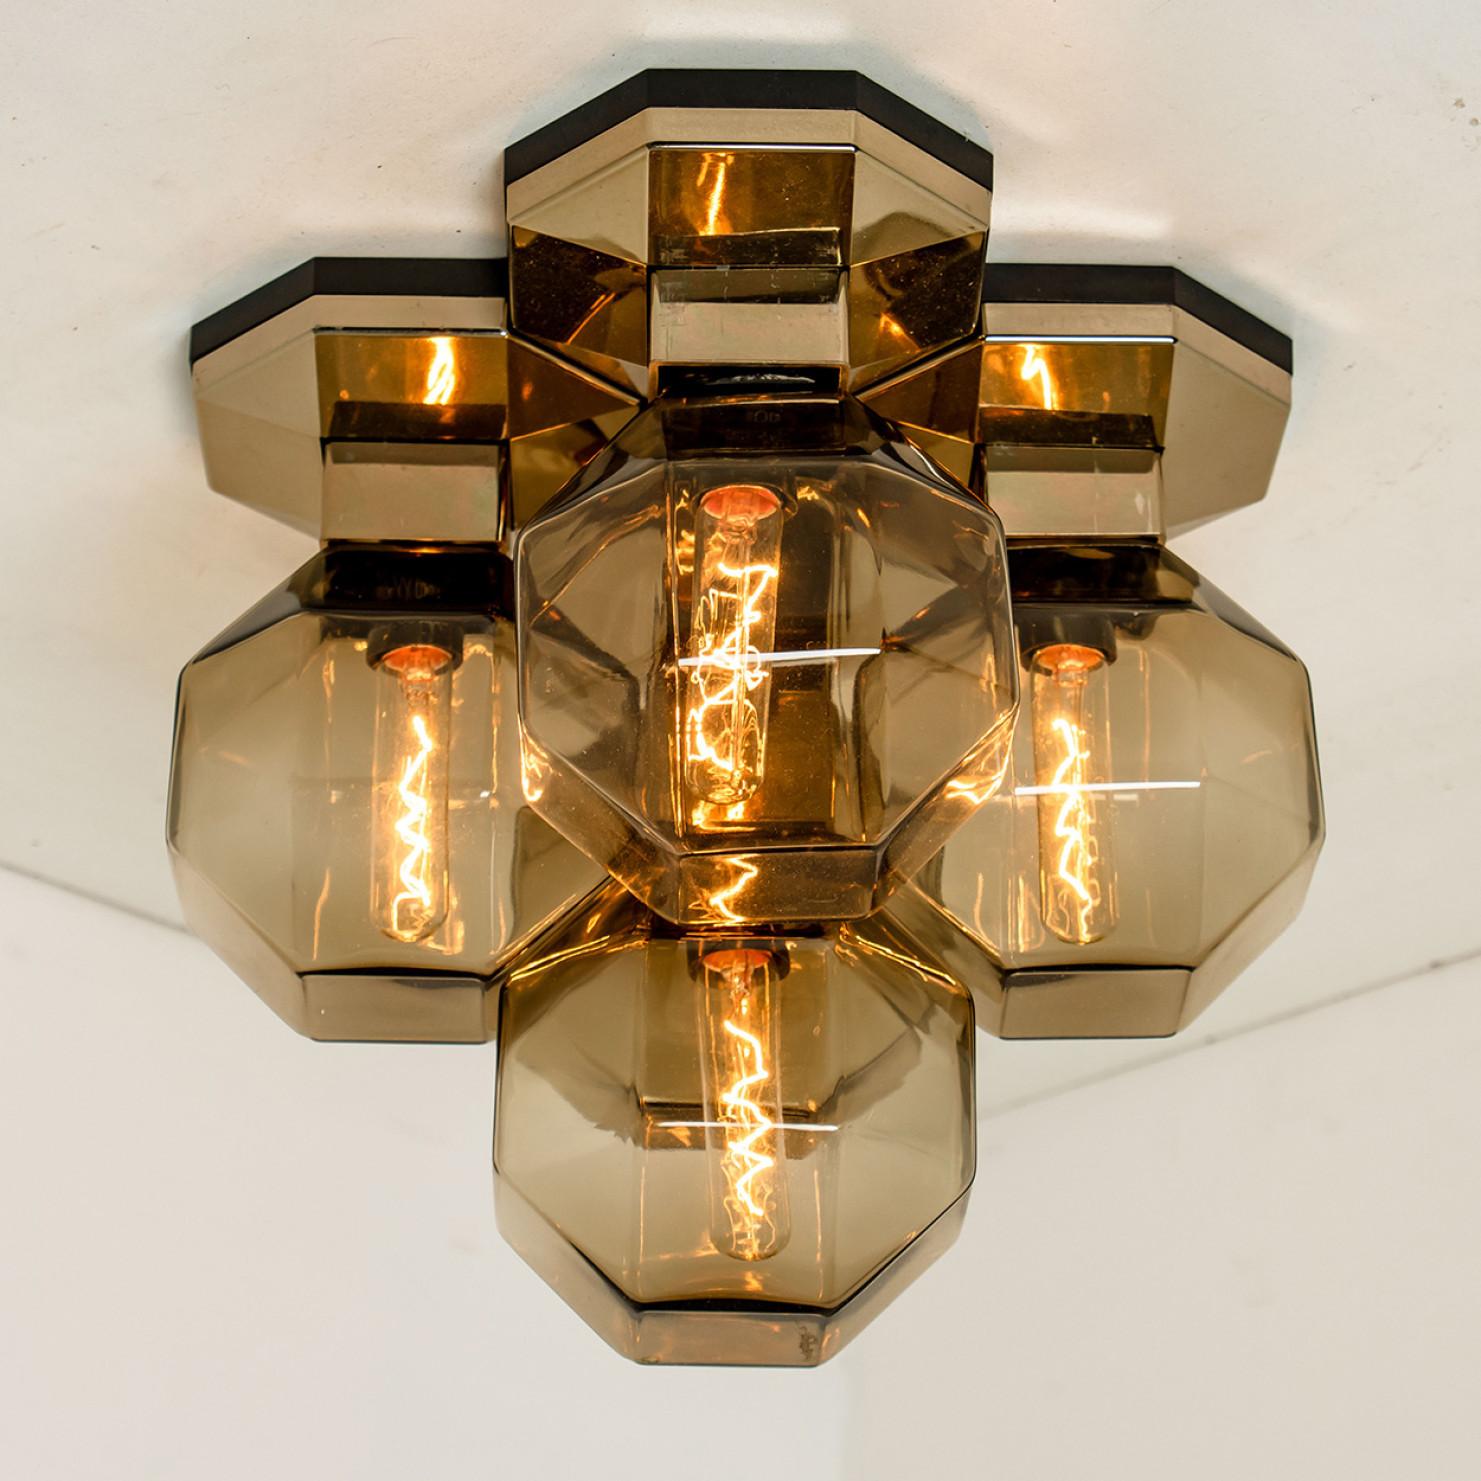 A rare wall or flush mount ceiling lamp by Motoko Ishii for Staff Lighting Company, Germany. Heat-resistant resin, metalized base and 4 smoked glass shades. Beautiful design, reflective lamps in all directions. Typical design from the 1970s. The